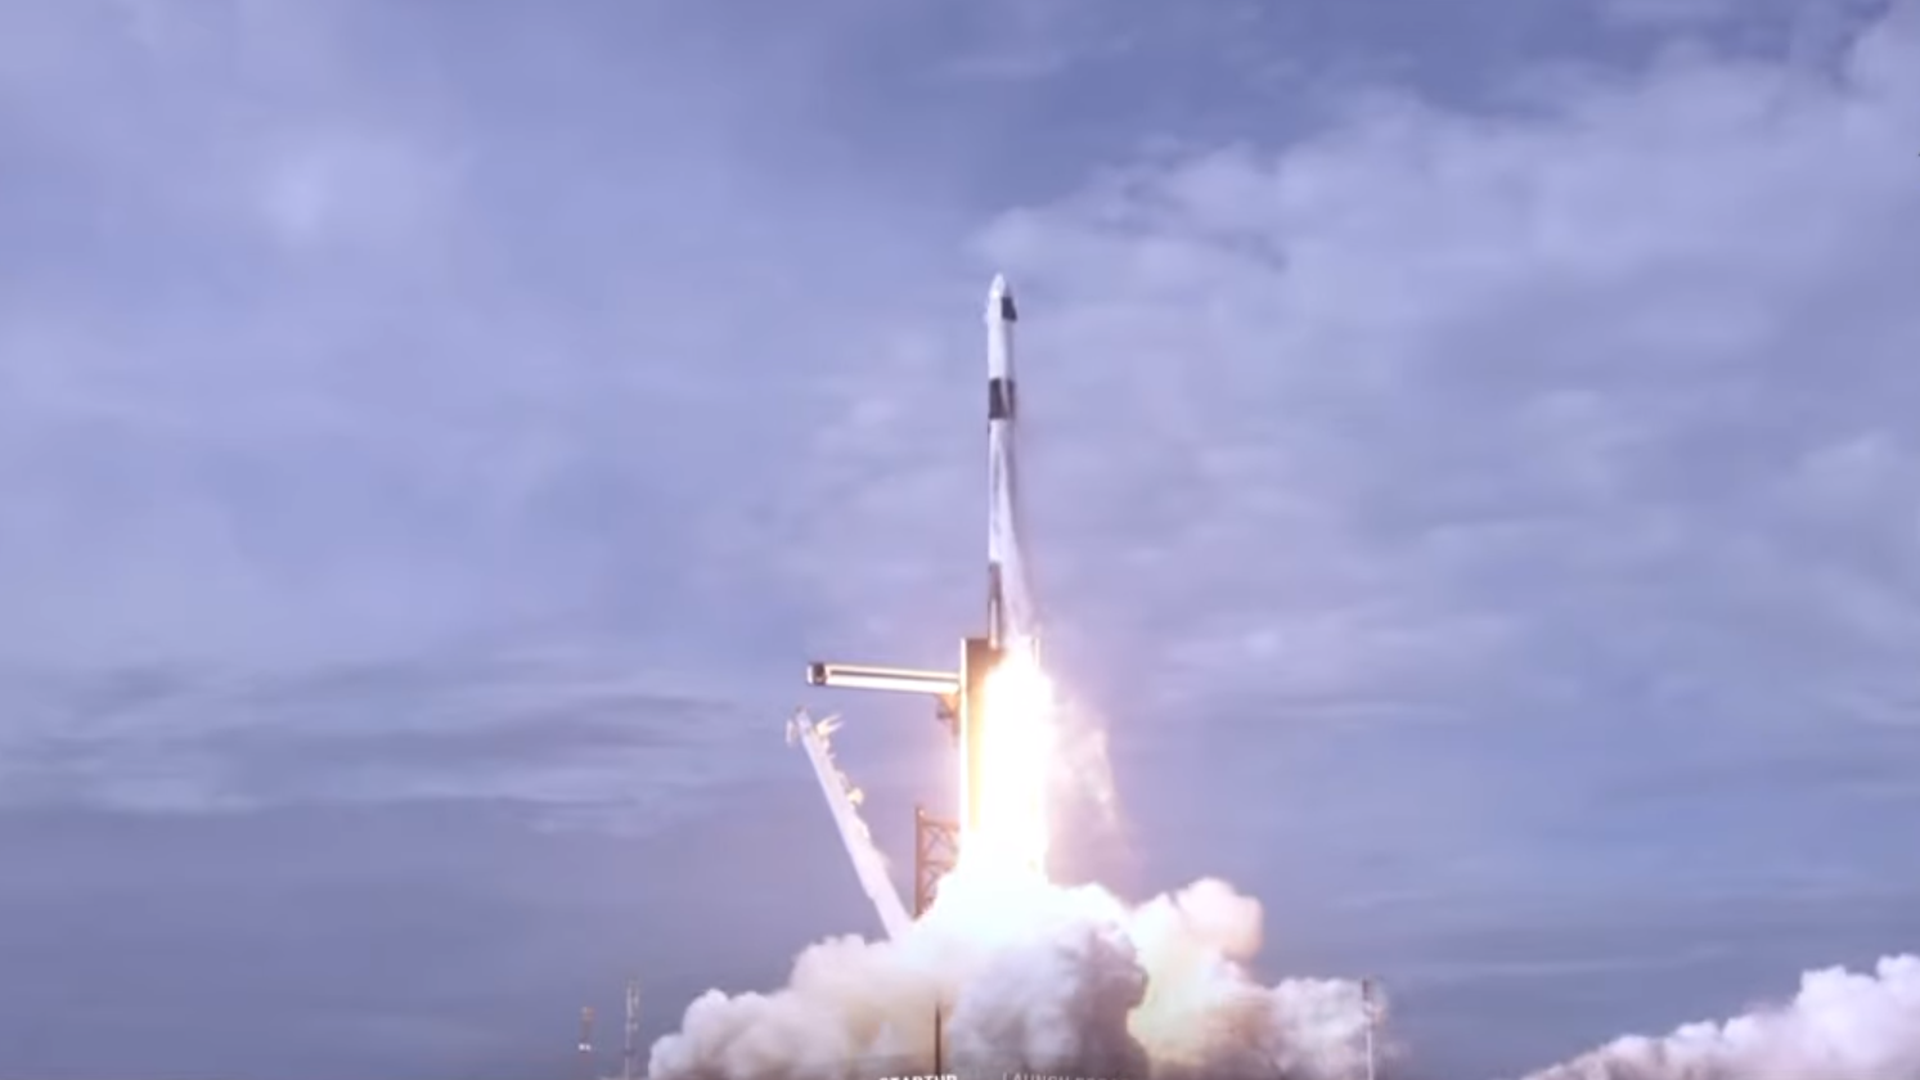 A SpaceX Falcon 9 rocket launching with a Crew Dragon atop